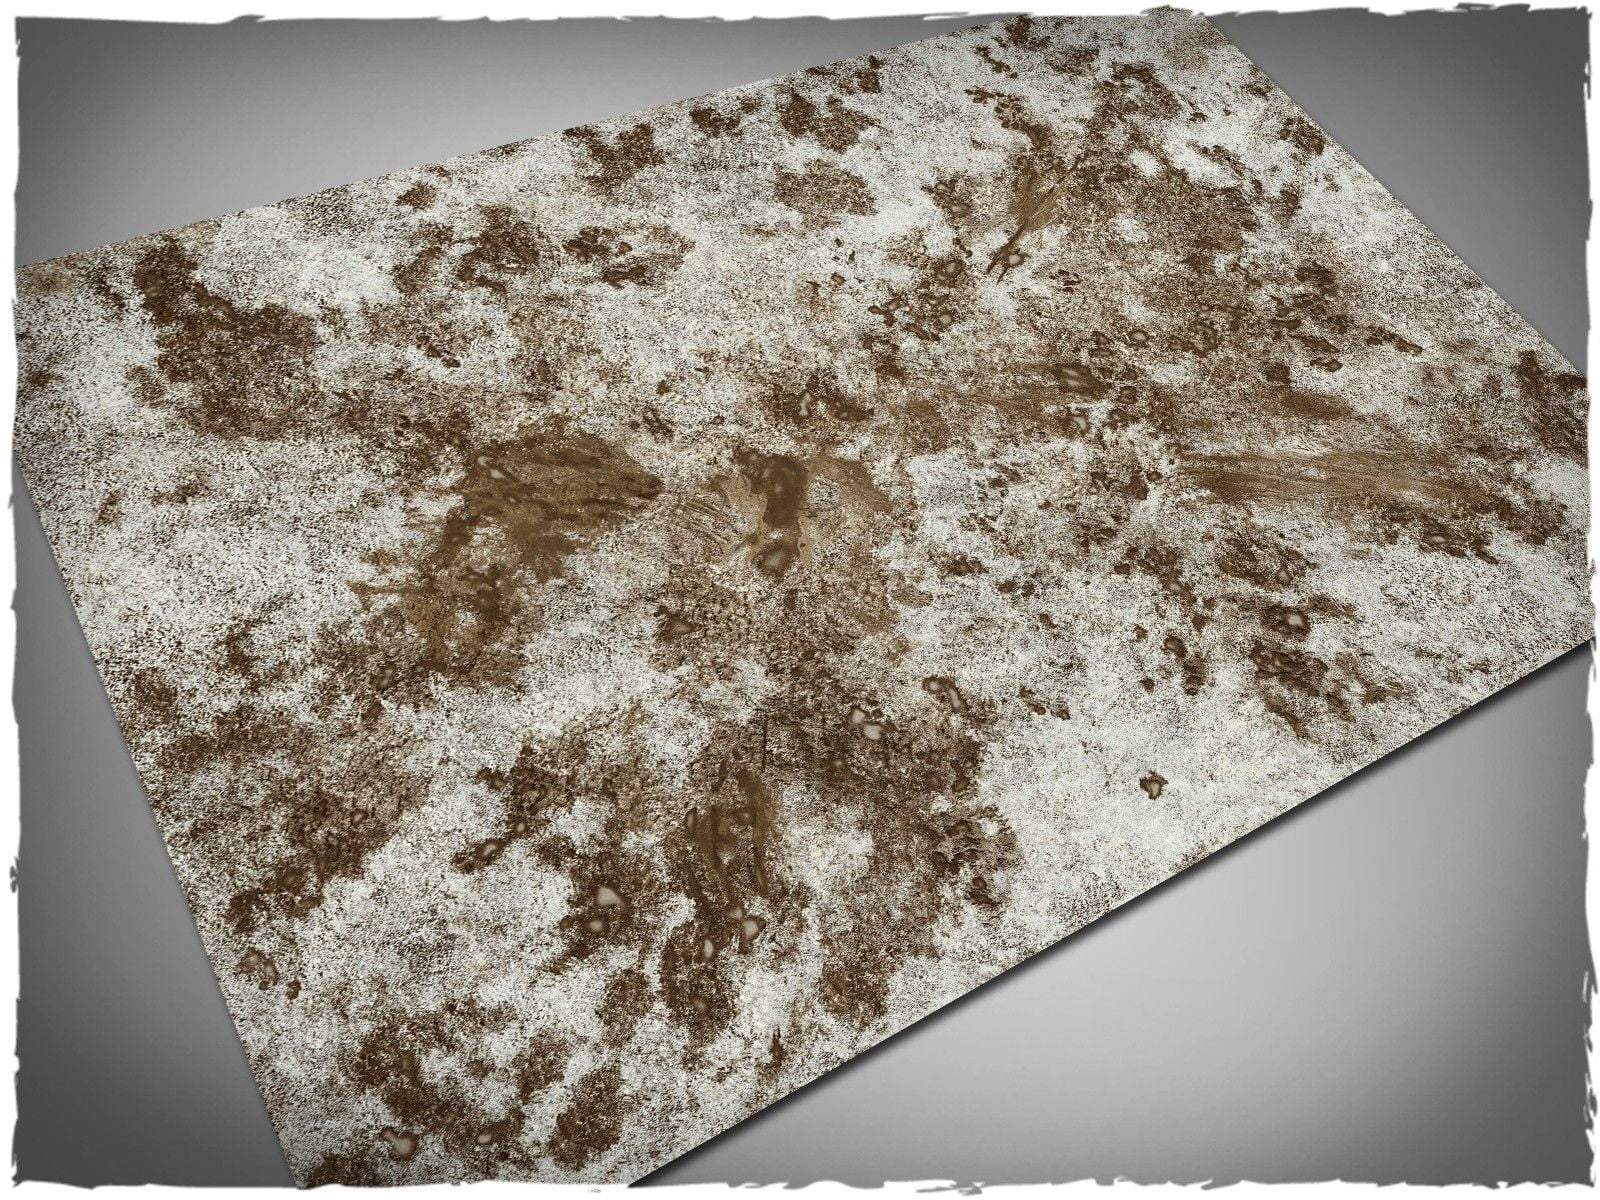 44in x 30in, Stalingrad Theme Cloth Games Mat